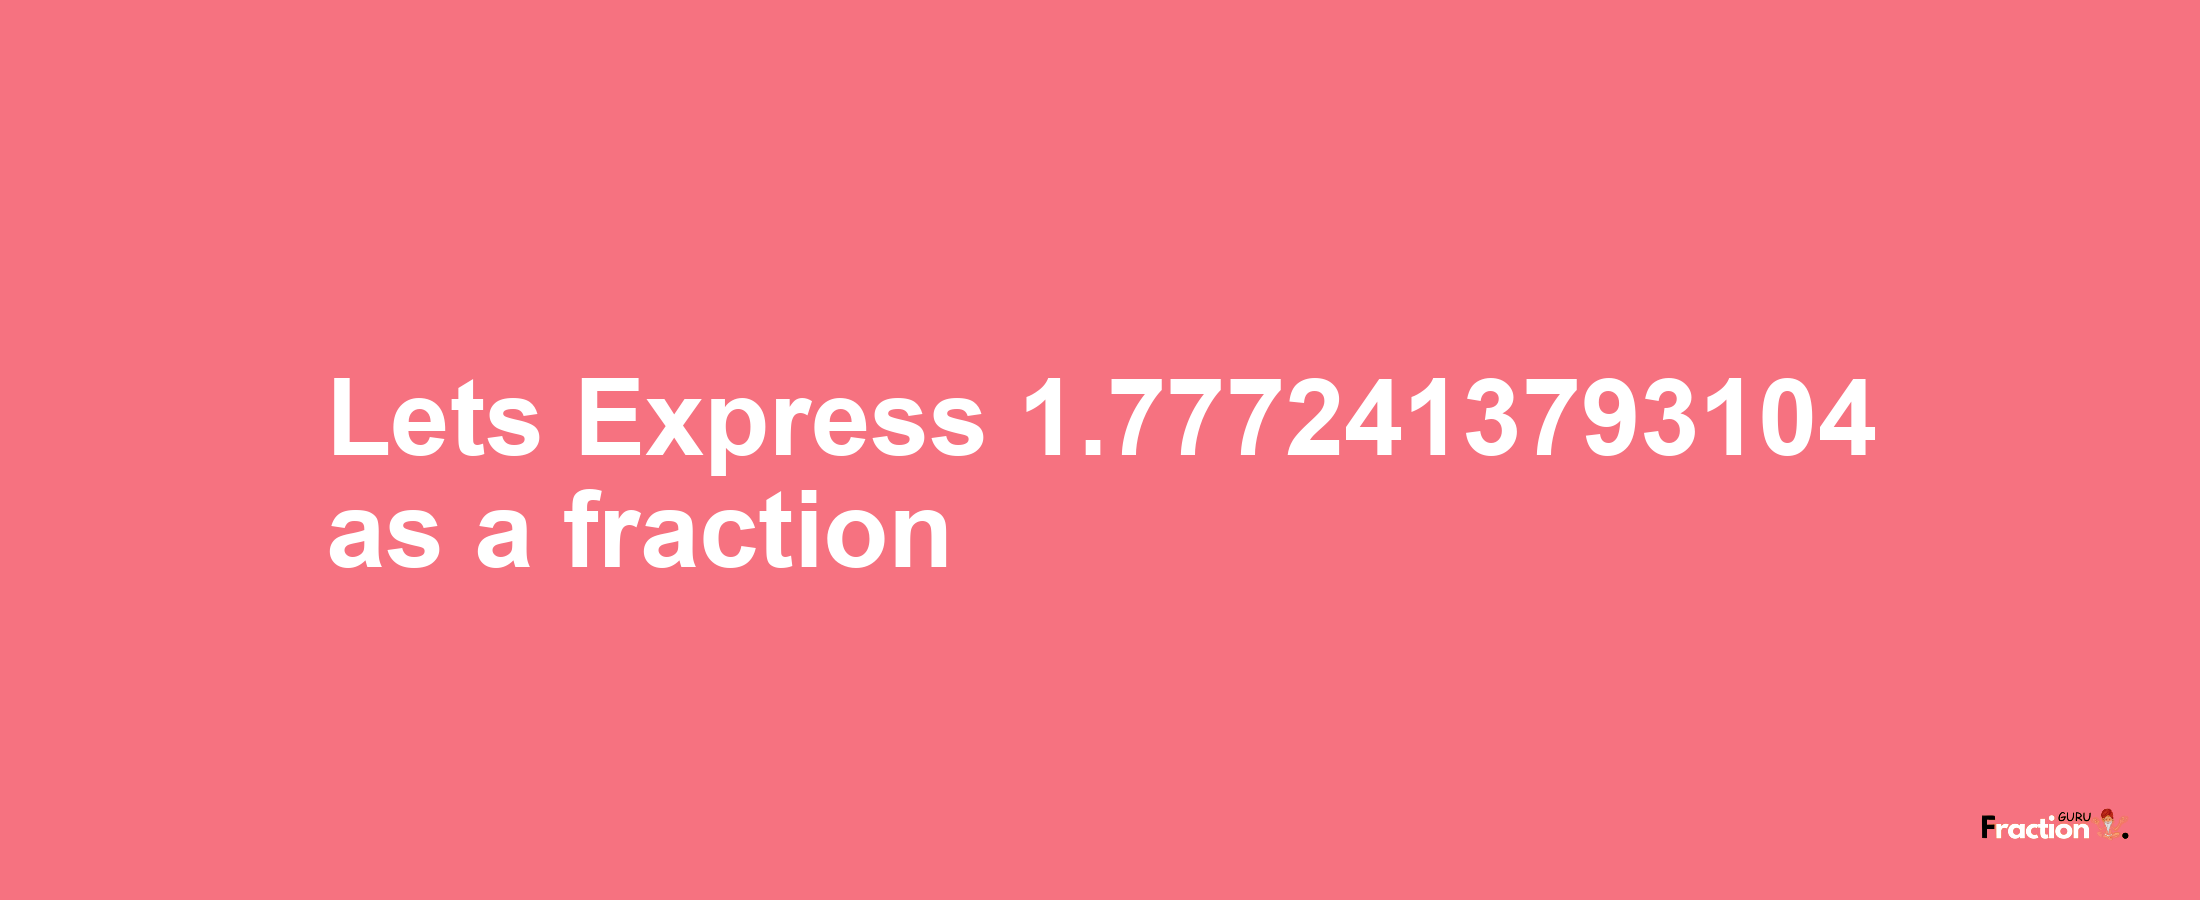 Lets Express 1.7772413793104 as afraction